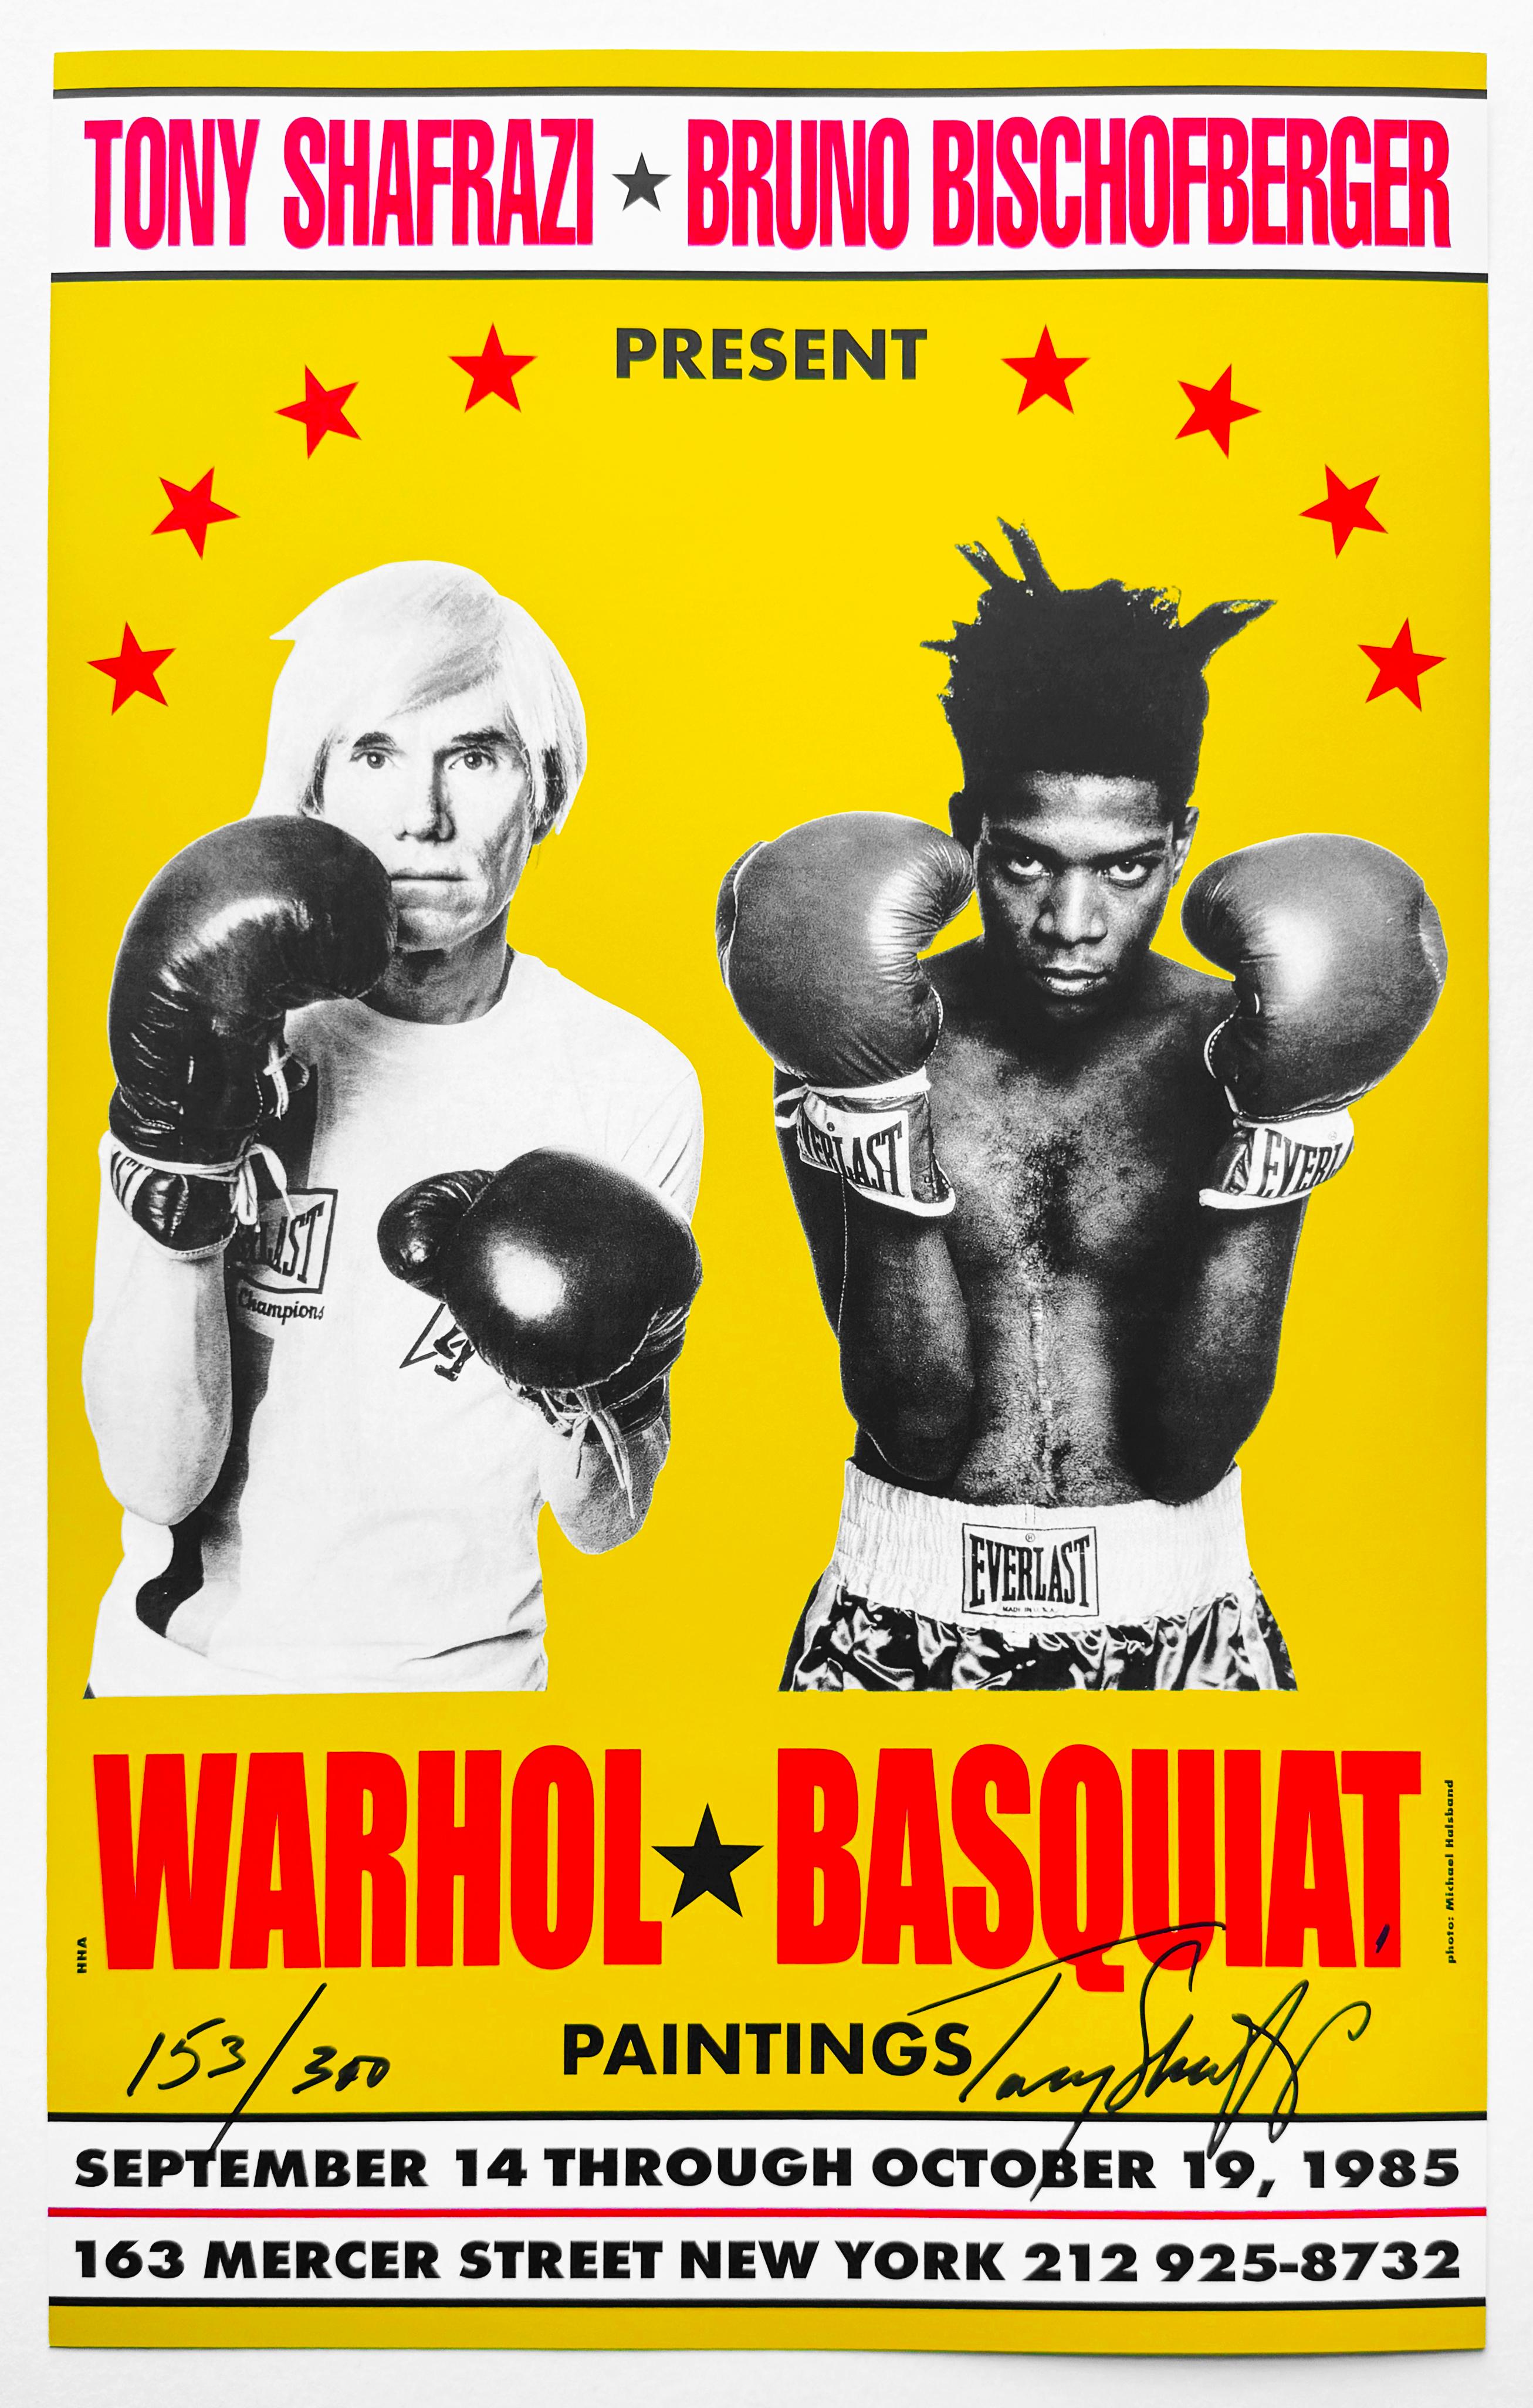 Warhol-Basquiat 1985 Limited Edition Poster (30th Anniversary Edition)